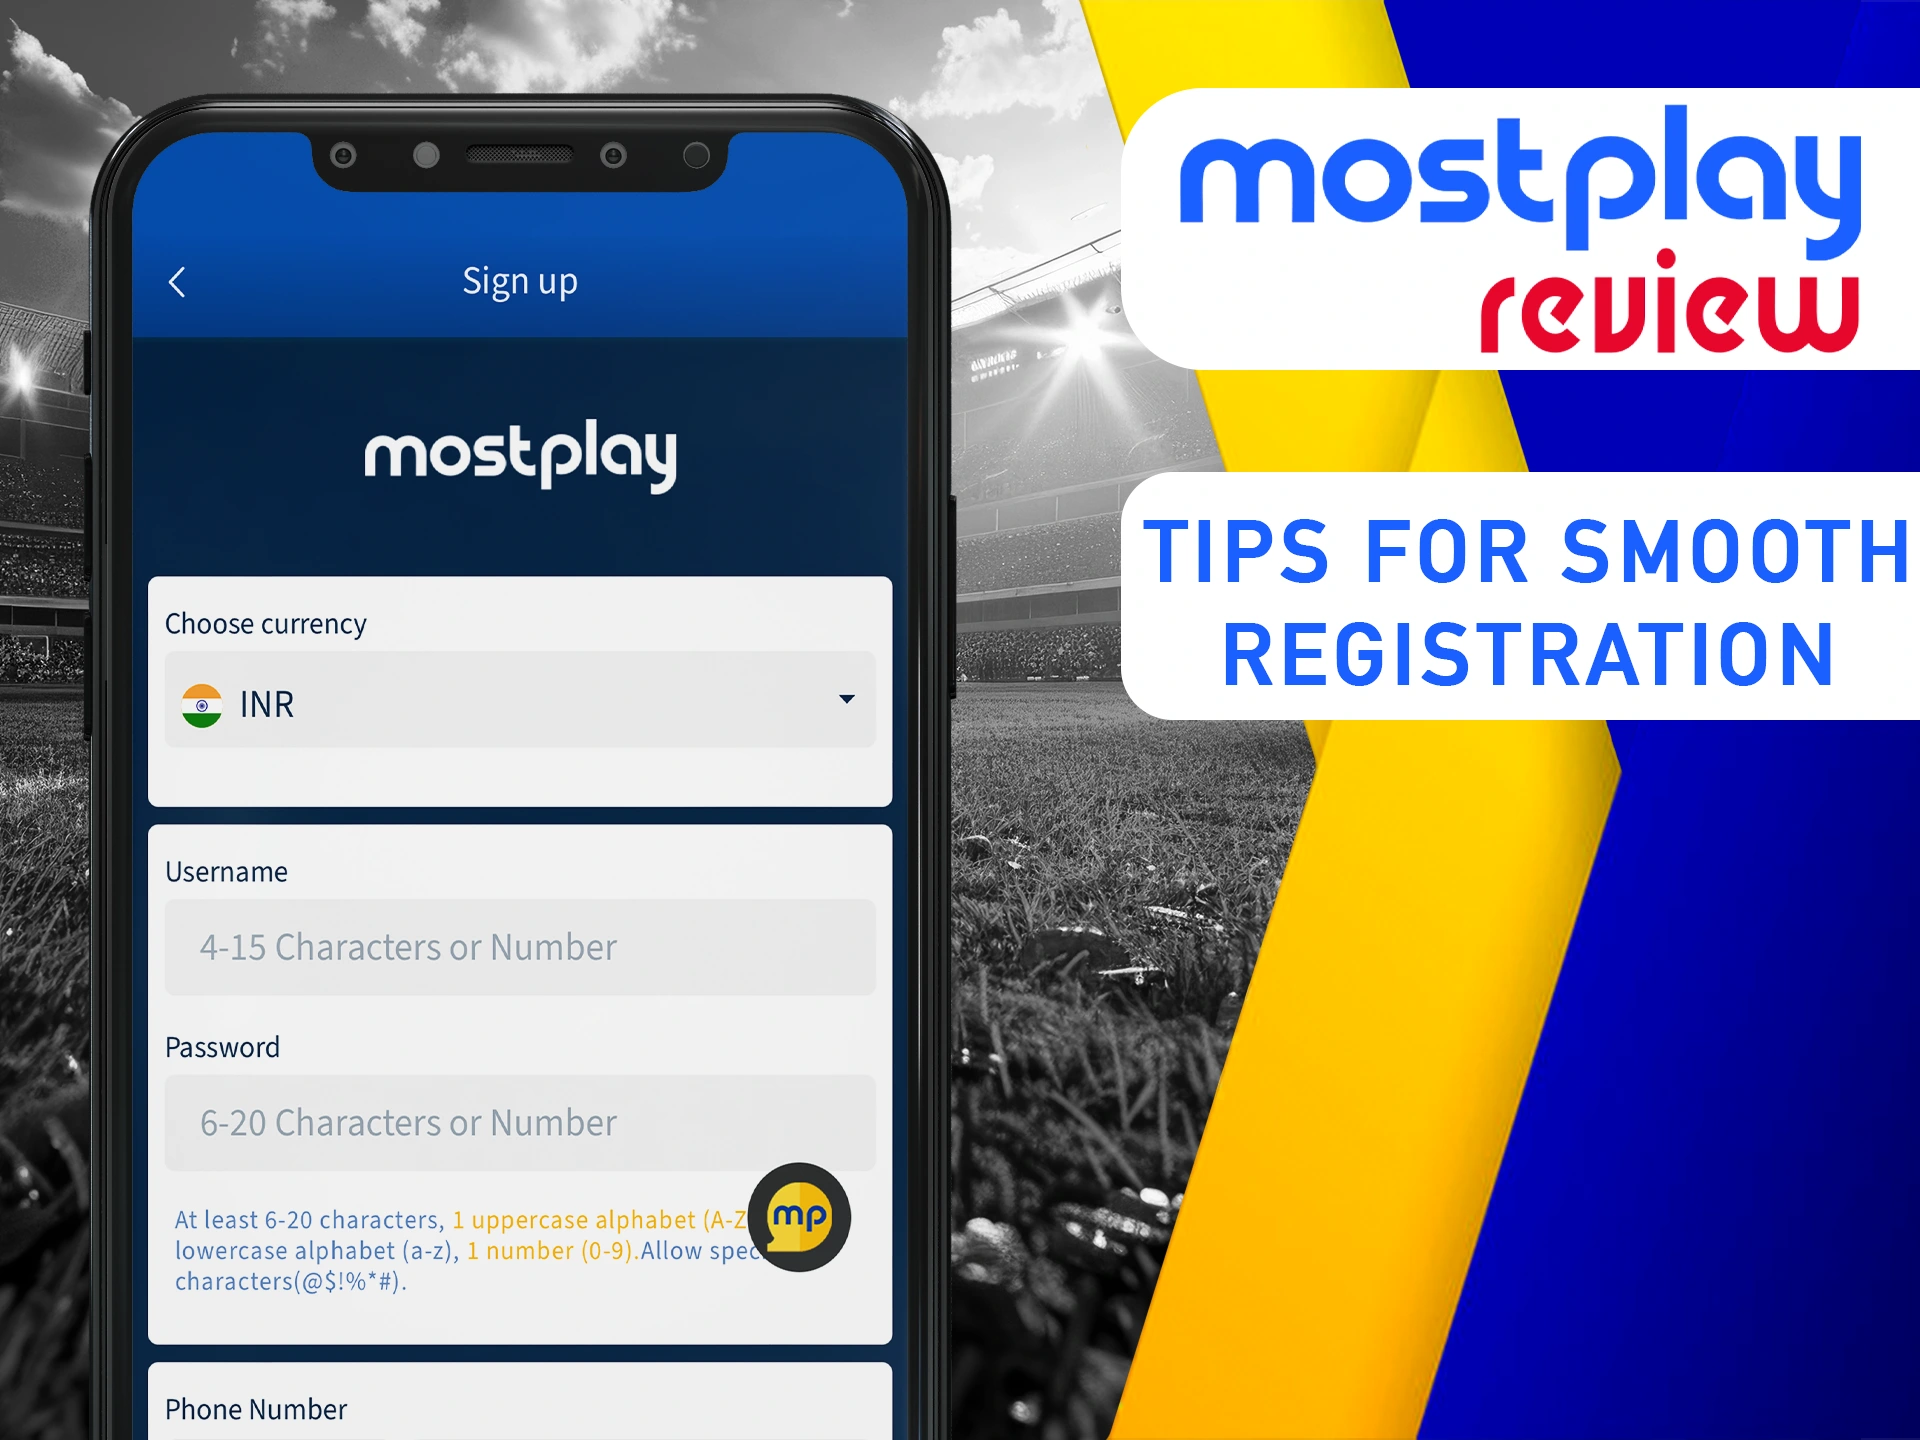 Find out the information to make your Mostplay account registration a success.